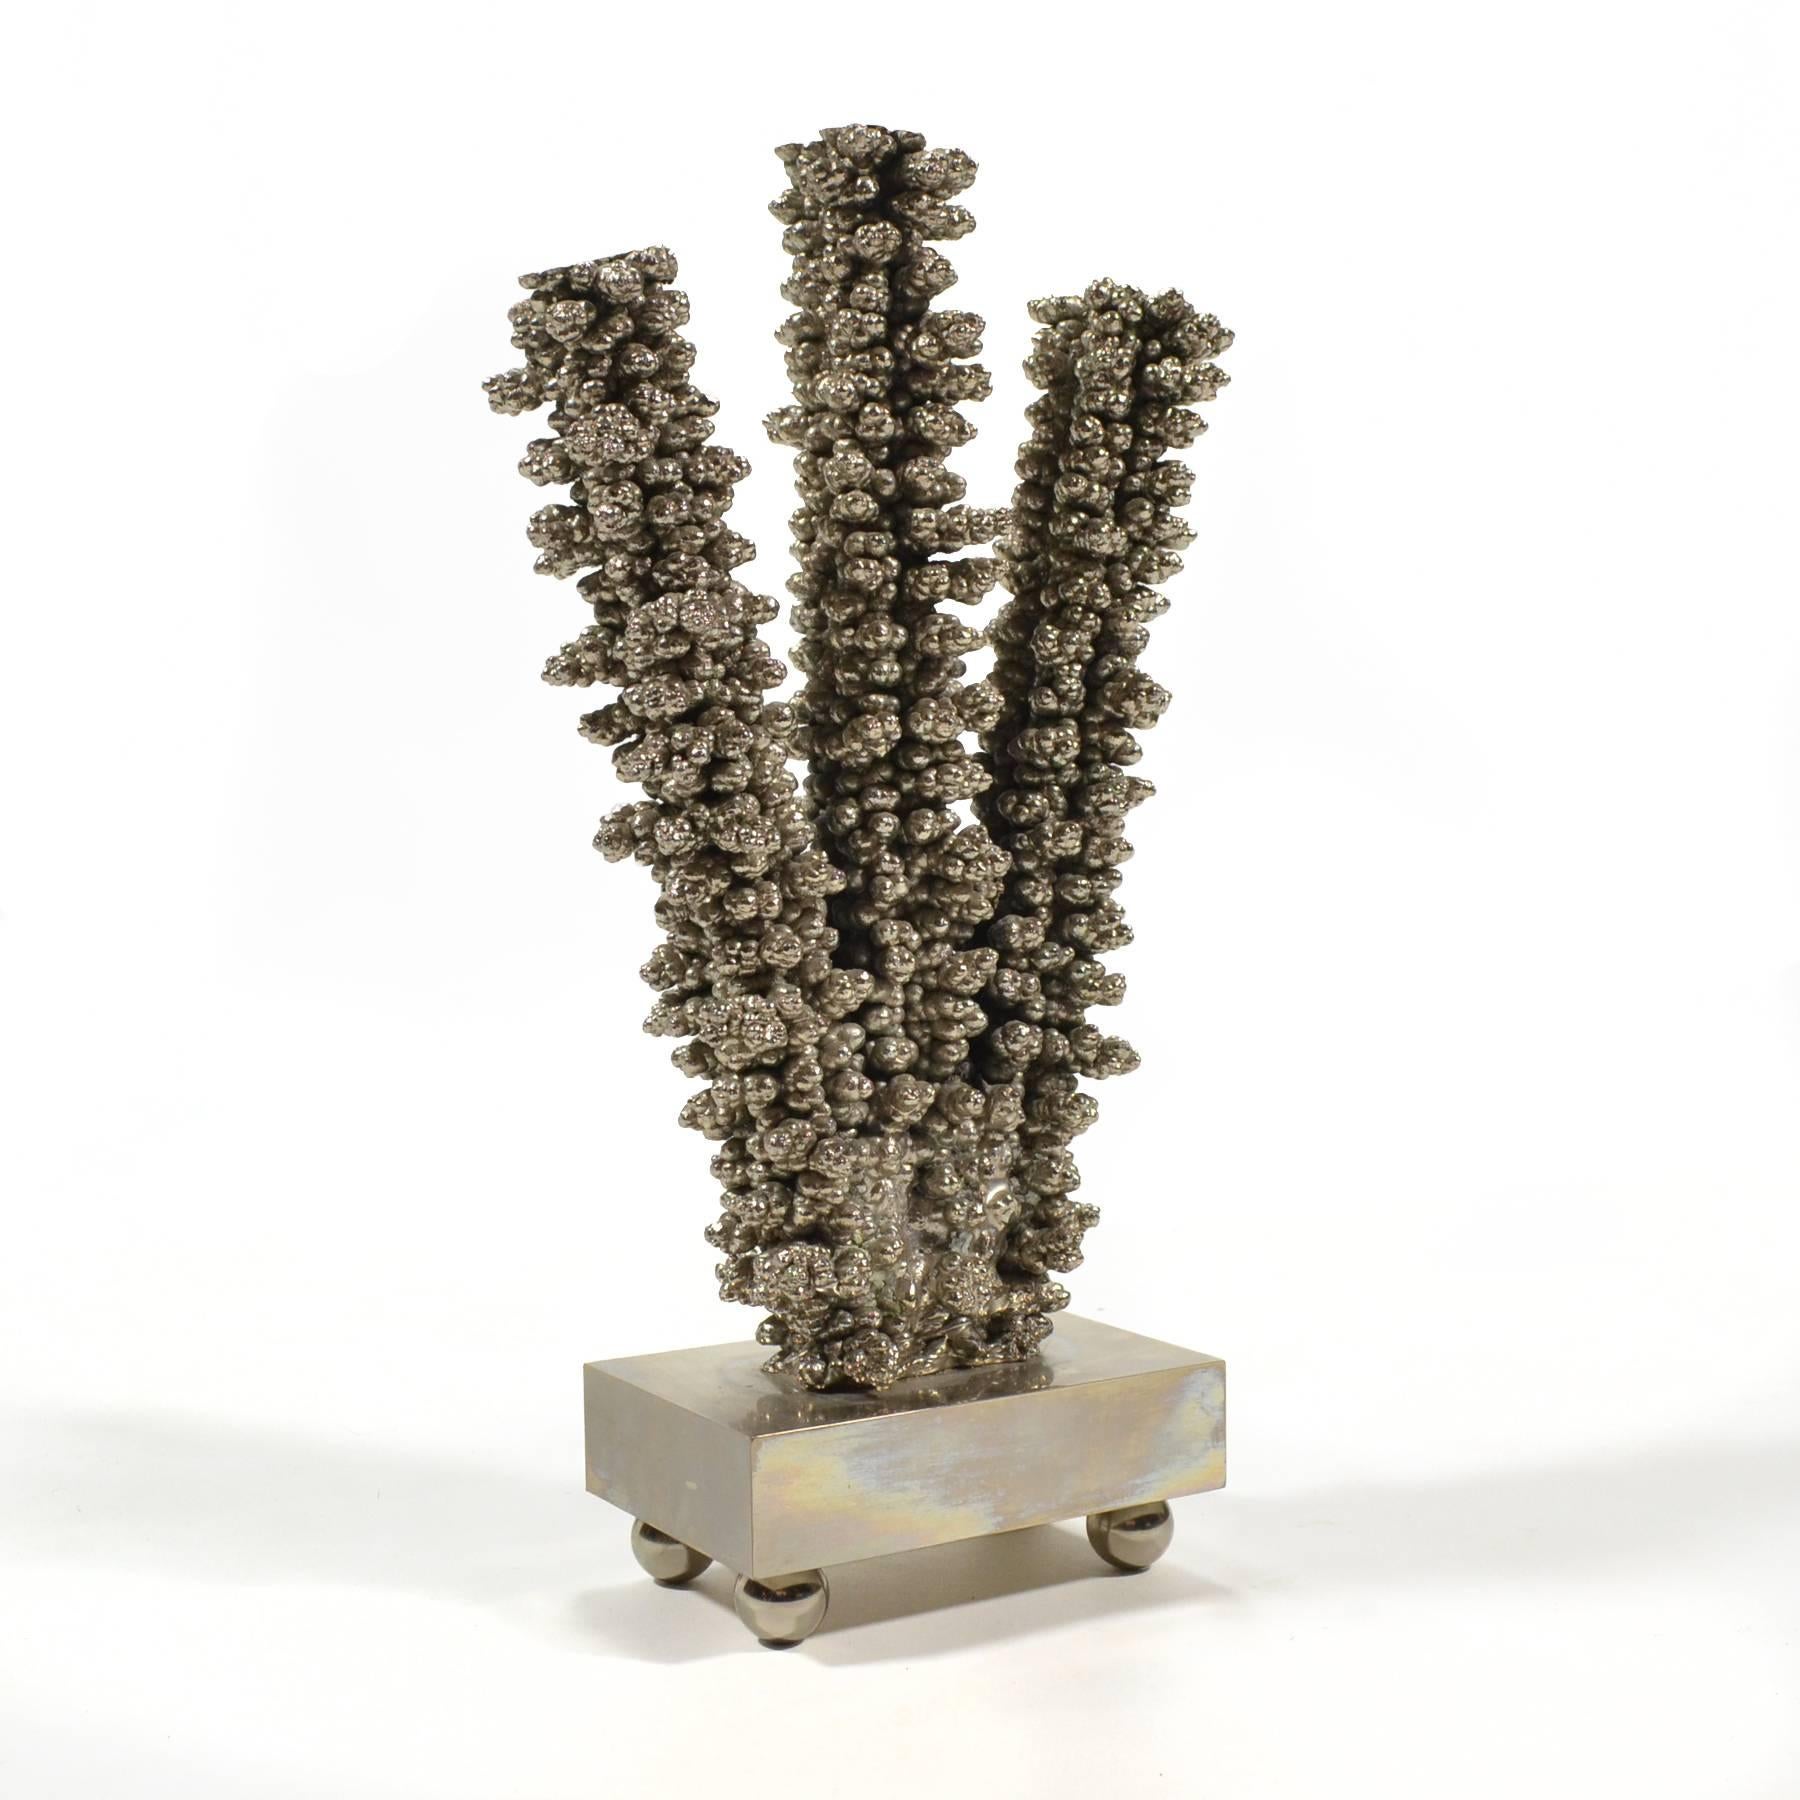 This remarkable abstraction by Fiskel is a very evocative form that makes one think of shapes in nature such as coral. It is difficult to tell if it was created as a lost-wax casting, or an additive process, but it has an incredibly rich, visceral